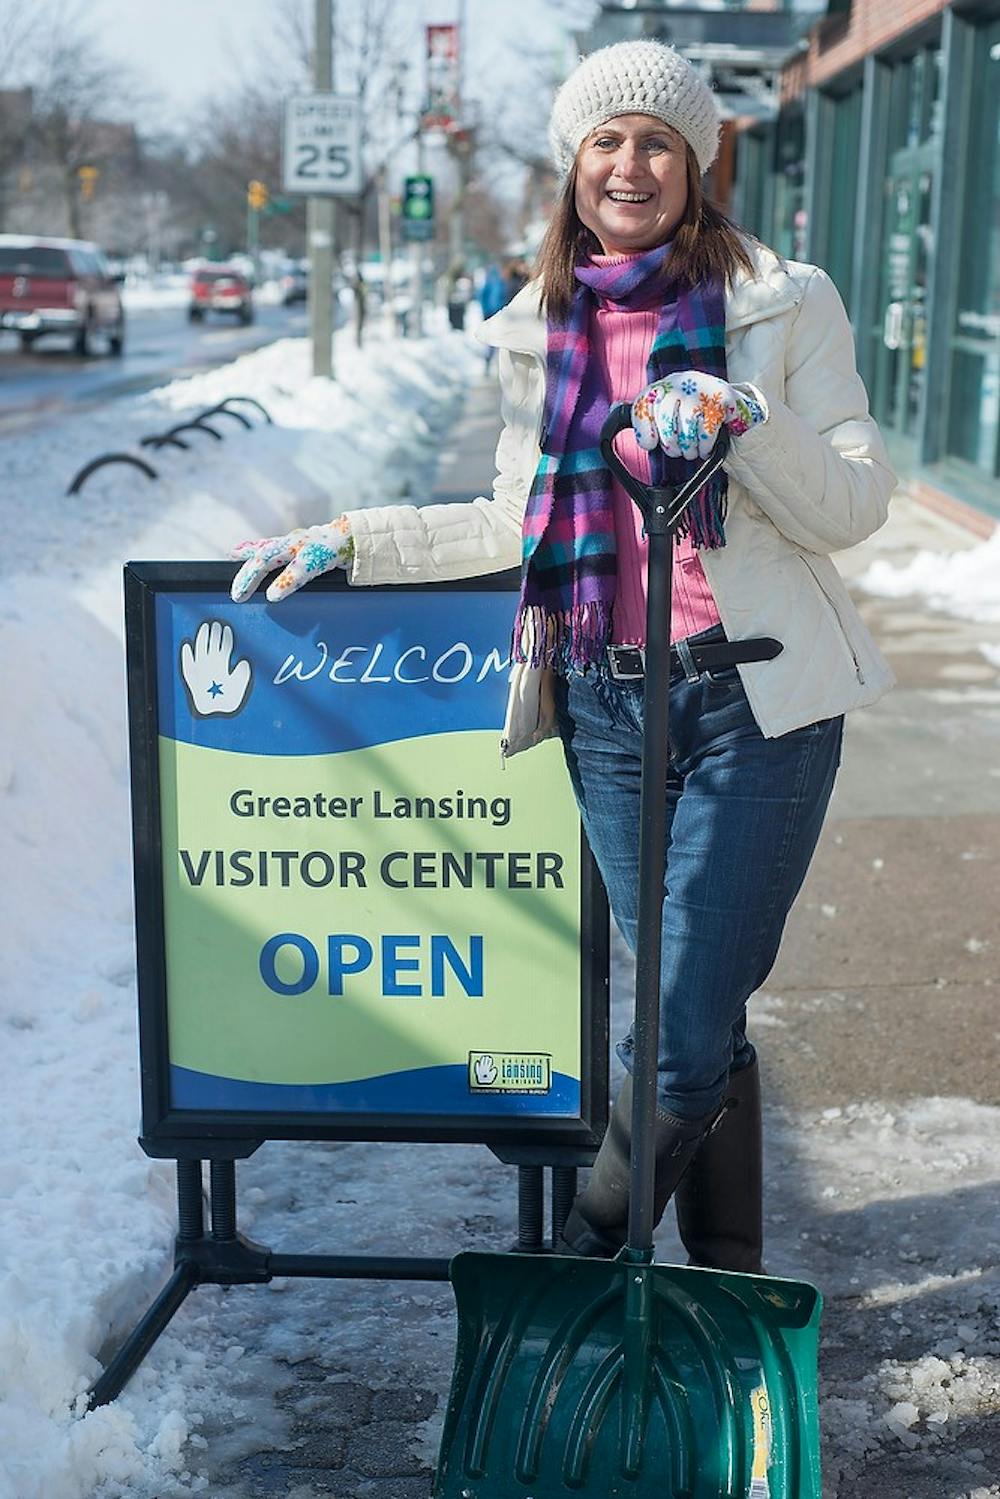 <p>Visitor information specialist Barb Doyal poses for a portrait Feb. 3, 2015, outside where she works at the Greater Lansing Visitor Center, 549 E. Grand River Avenue in East Lansing. The Greater Lansing Visitor Center opened in November 2012 to help build a stronger community between Lansing and East Lansing.</p>